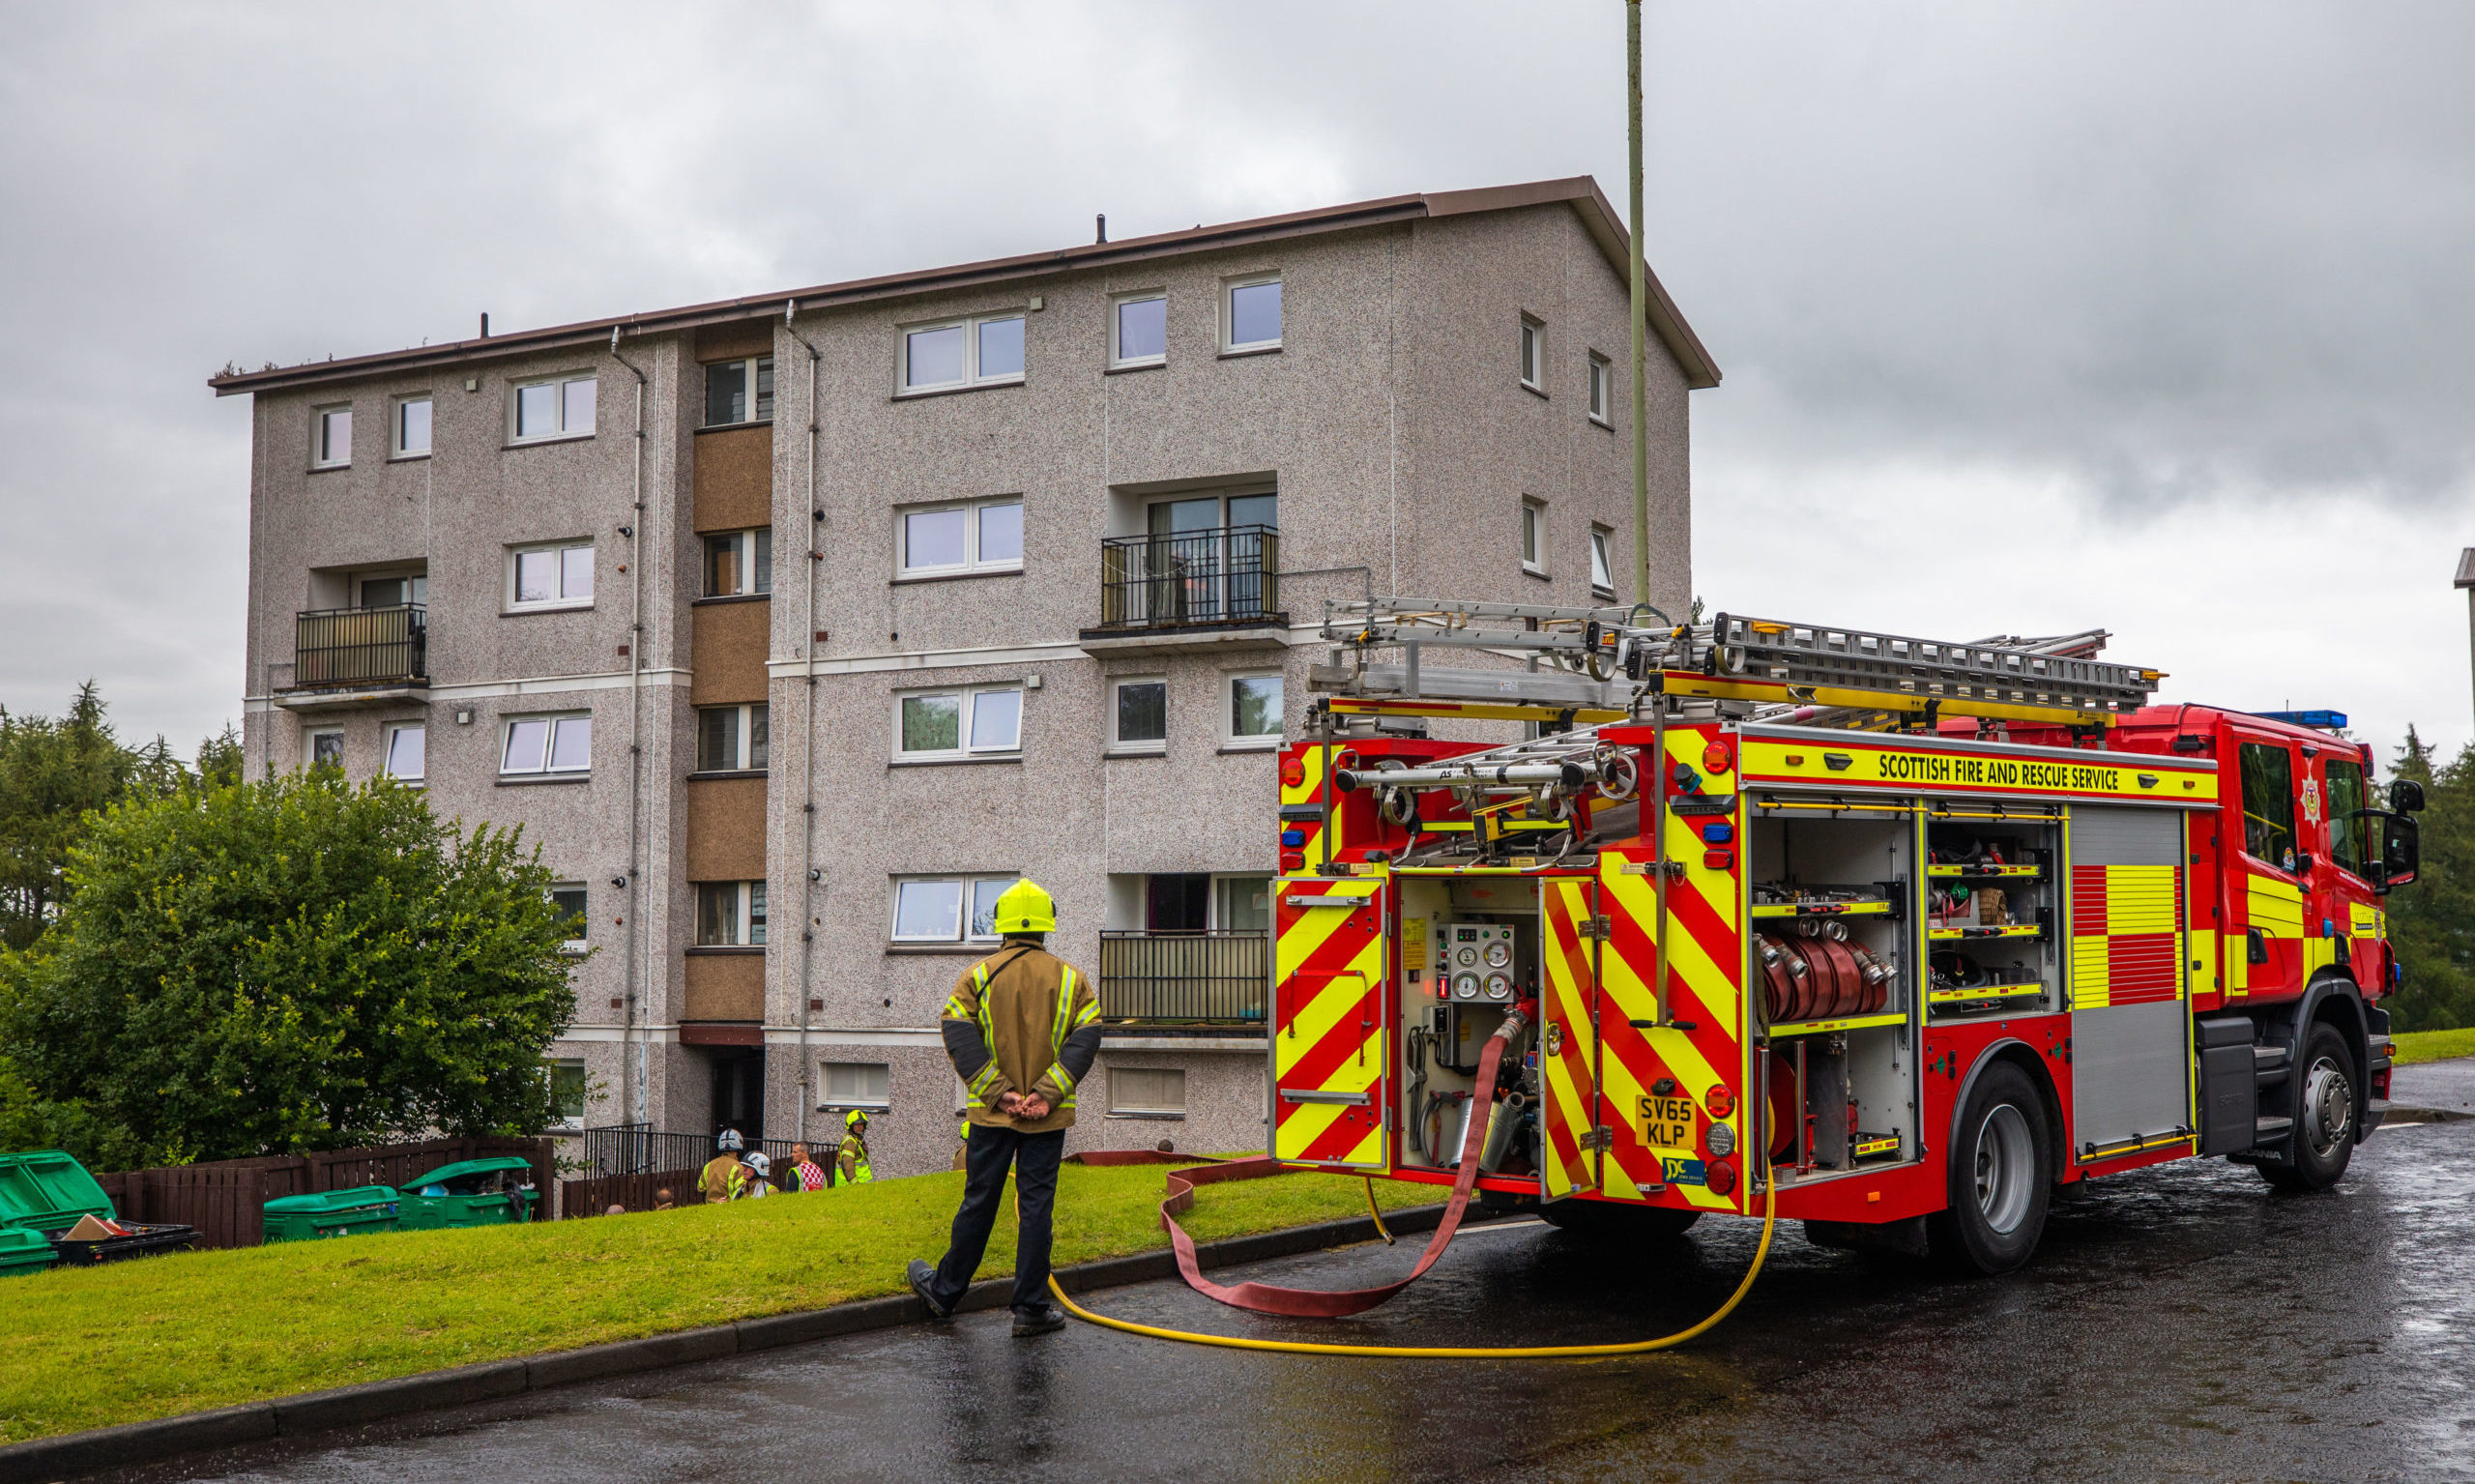 A fuse box fire at a block of flats on Strathtay Road was put out by firefighters.